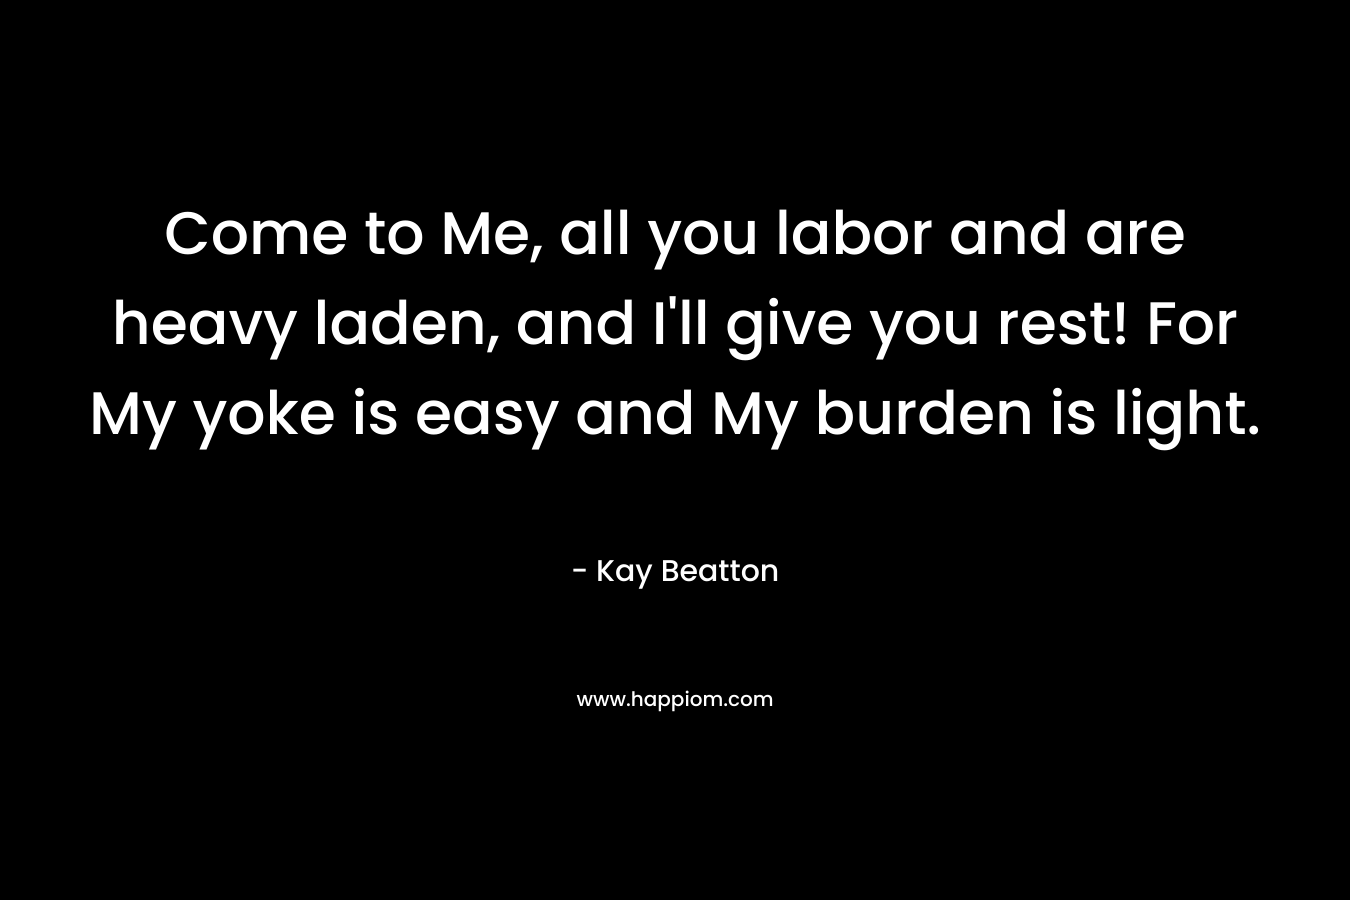 Come to Me, all you labor and are heavy laden, and I’ll give you rest! For My yoke is easy and My burden is light. – Kay Beatton